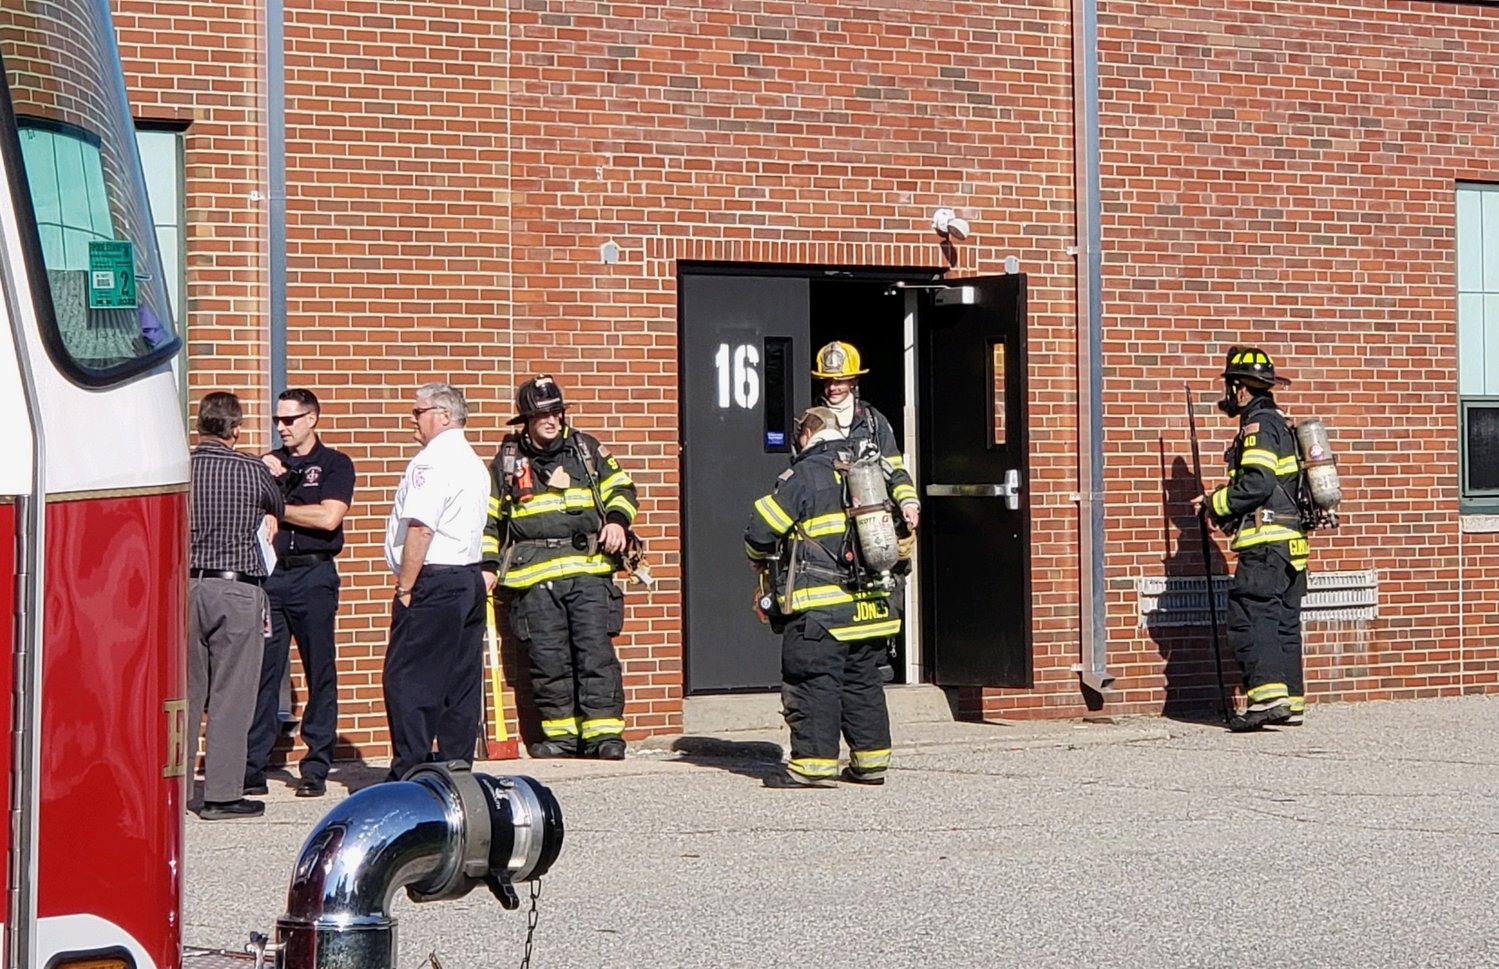 Portsmouth firefighters outside the high school cafeteria Wednesday morning, Oct. 12, after receiving a report of a gas odor inside.